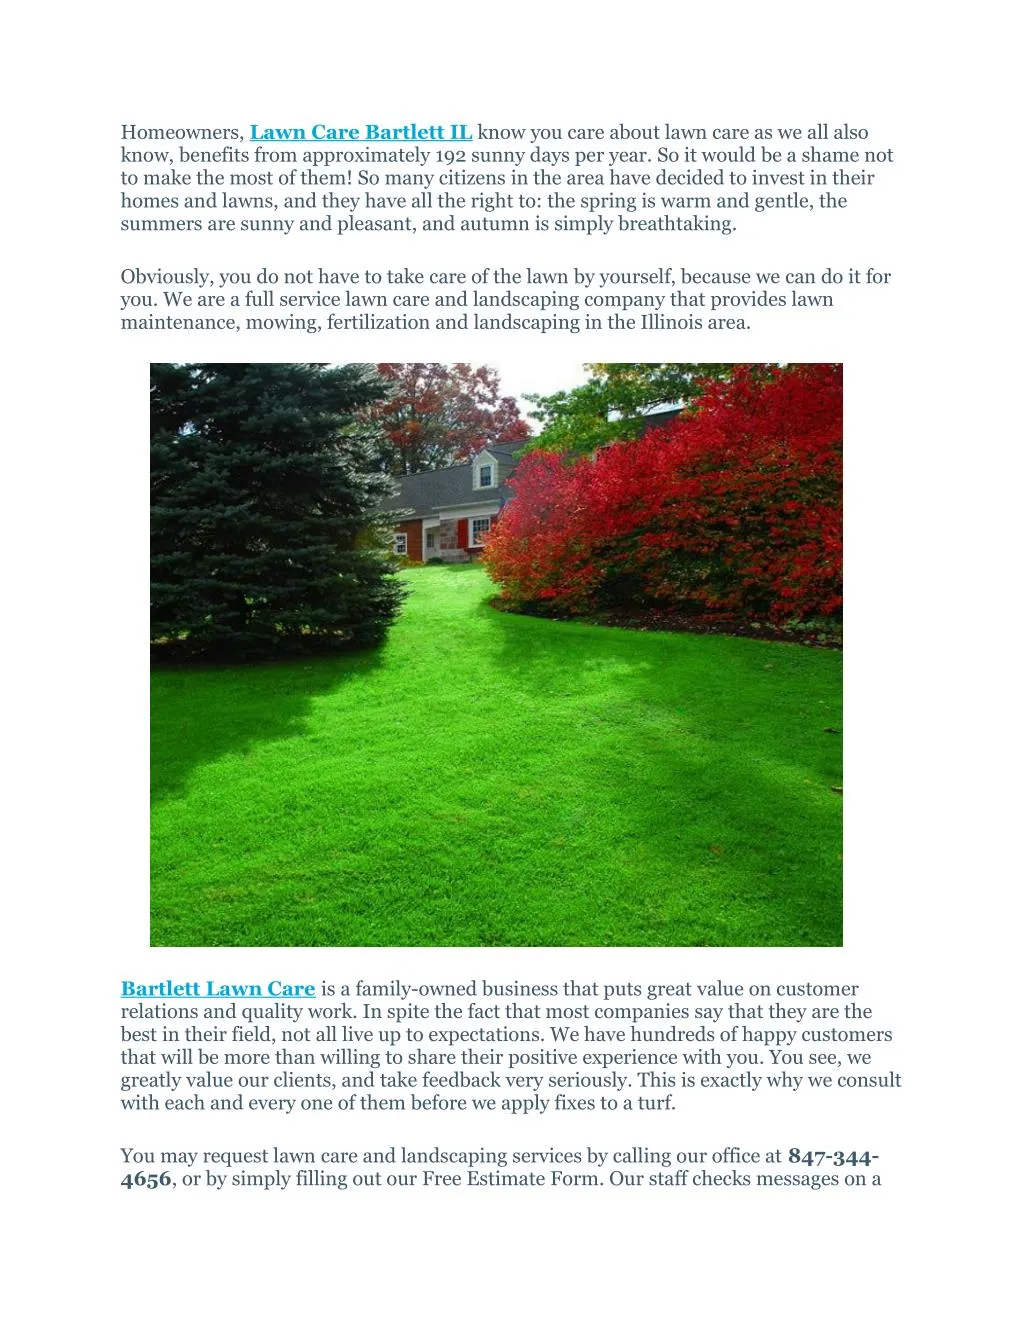 homeowners lawn care bartlett il know you care